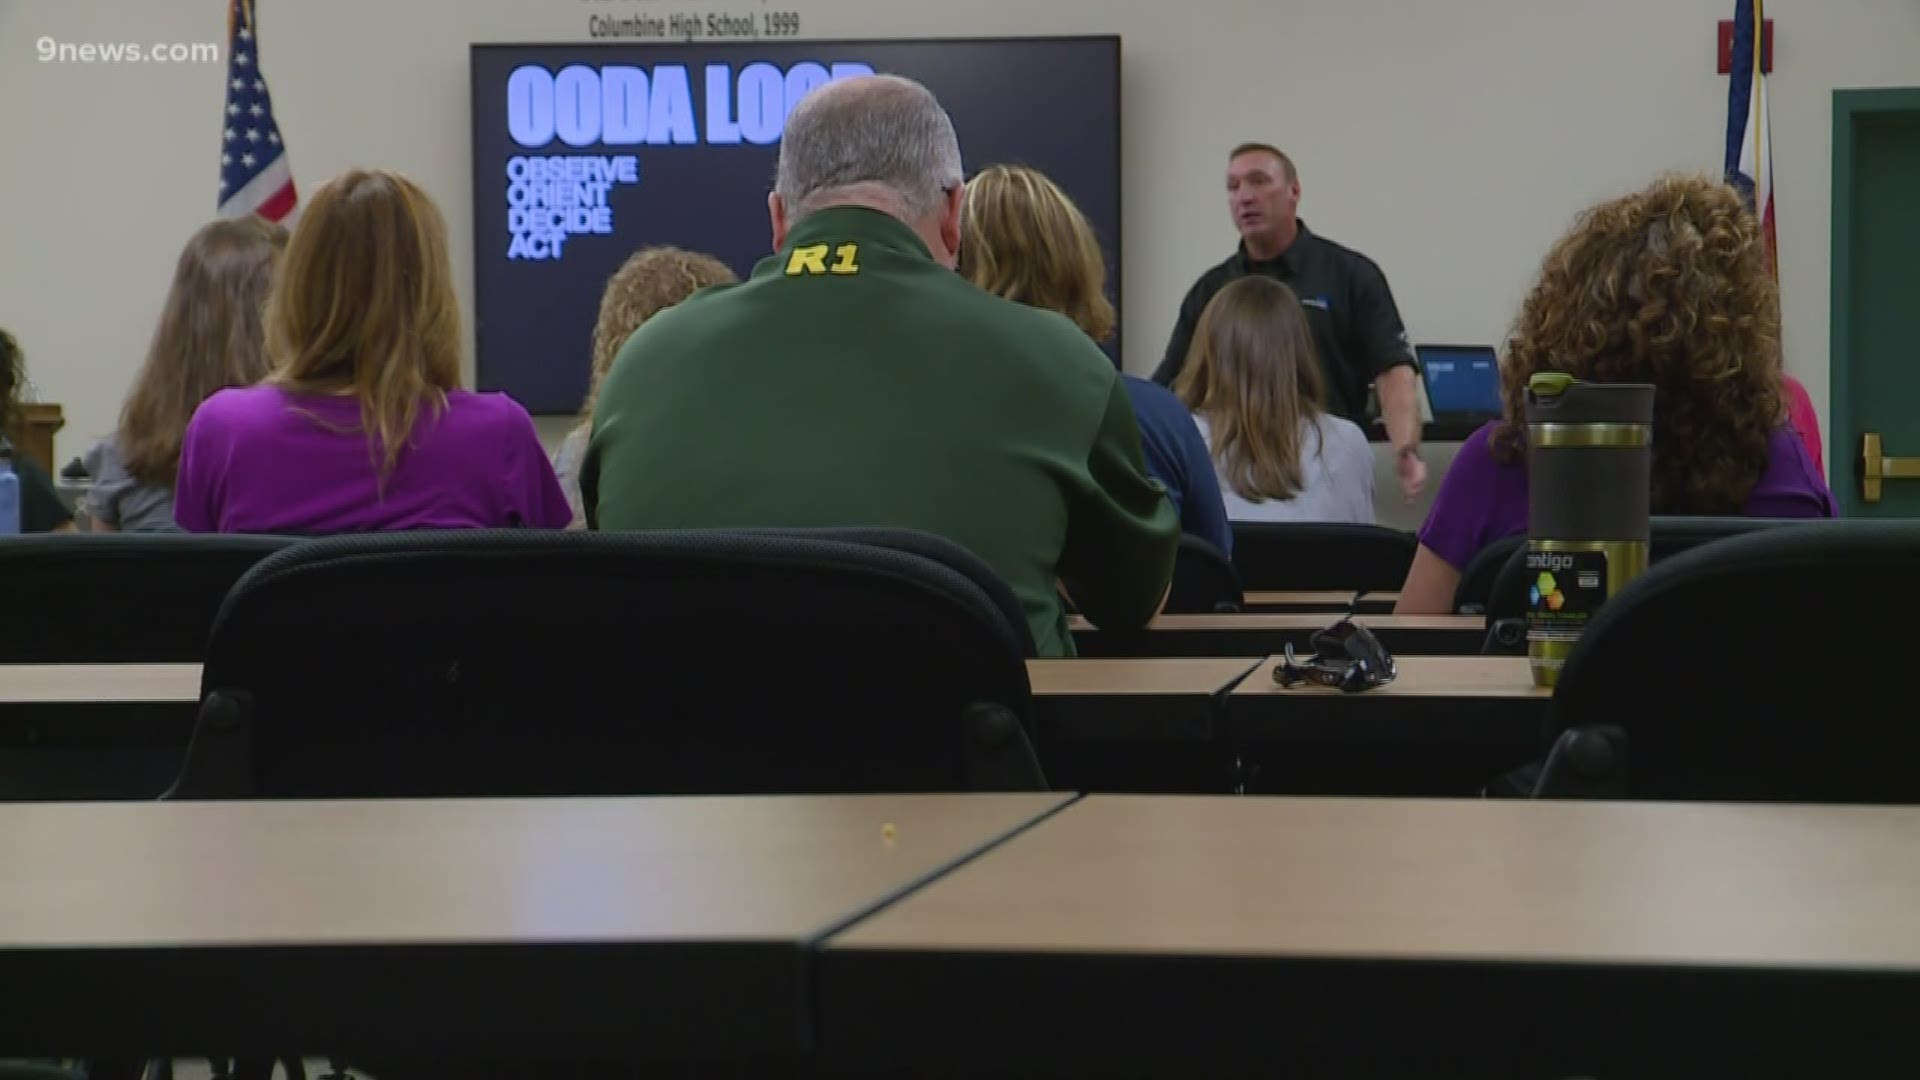 So far about 30 nurses in the Jefferson County School District have gone through the training and will be better prepared to respond in an active emergency at a school.